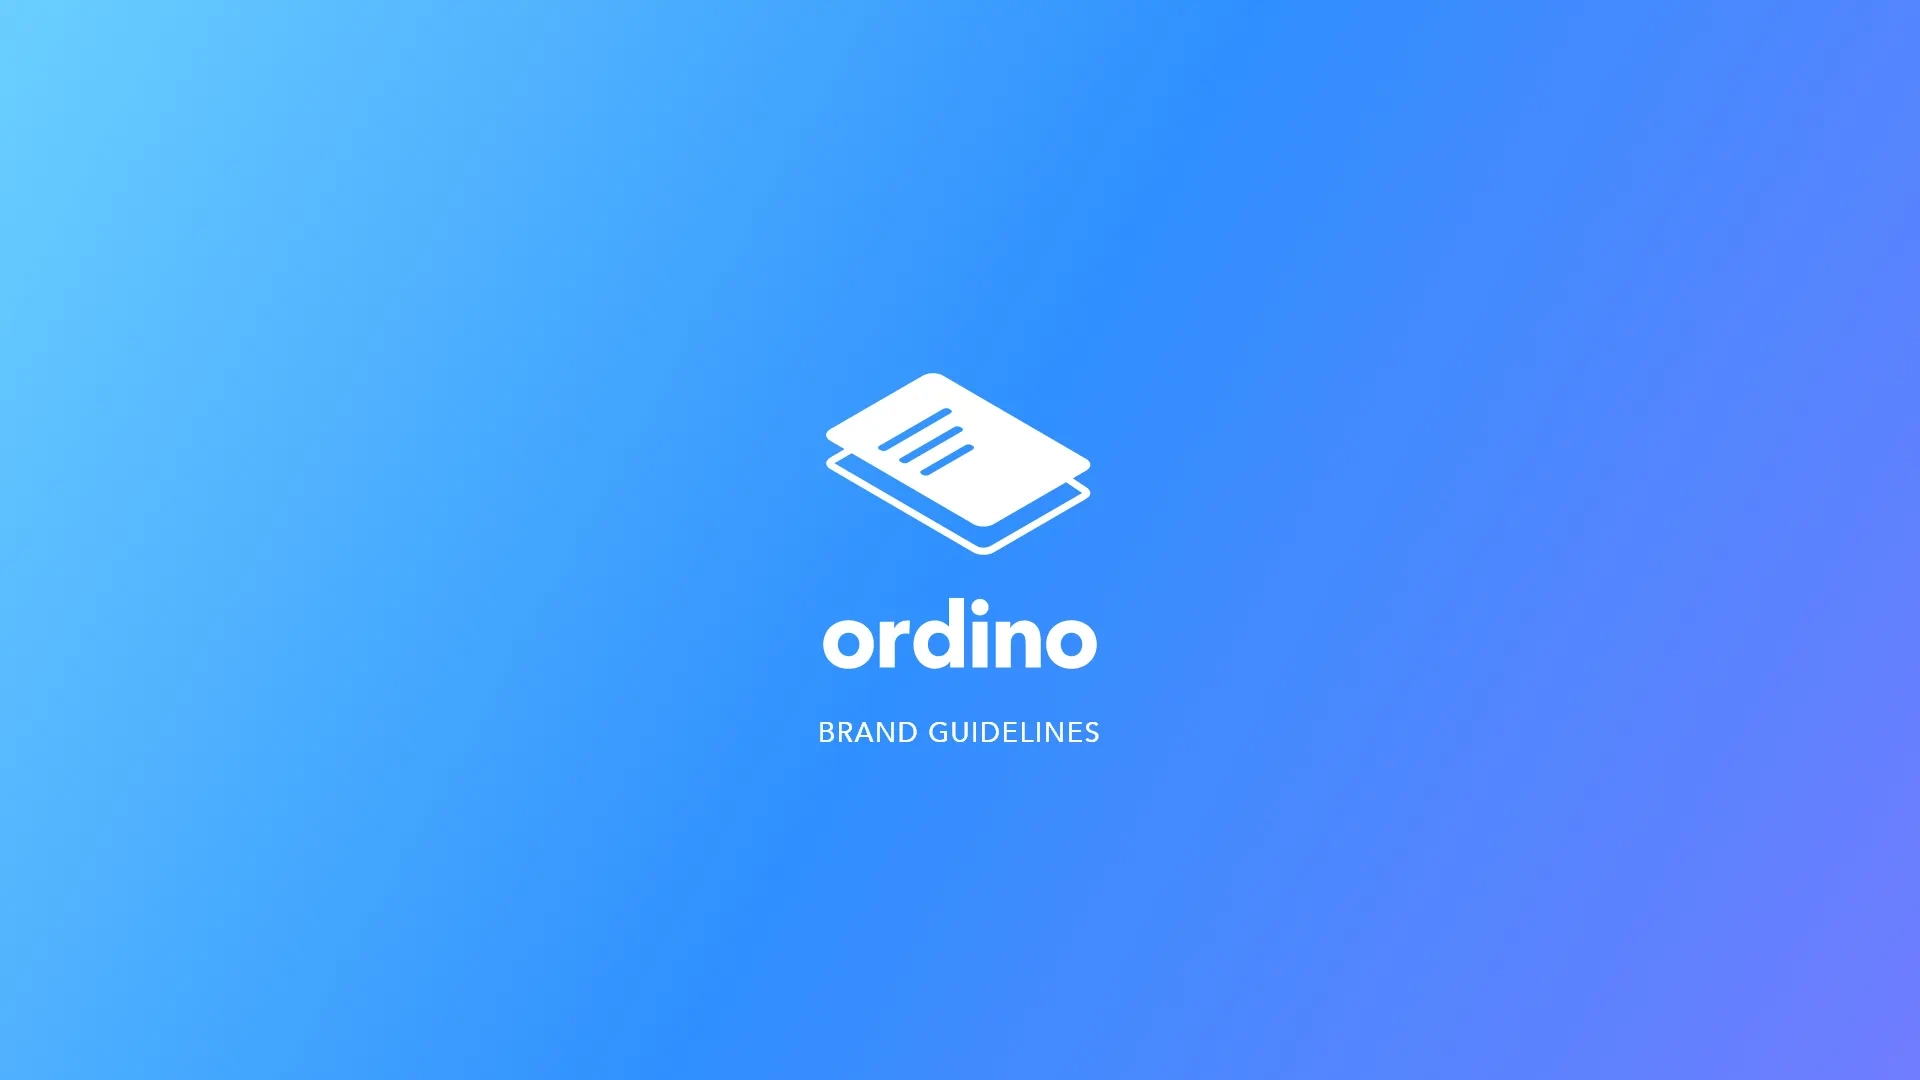 The first page of the Ordino brand guidelines shows the logo in white on a blue and purple background